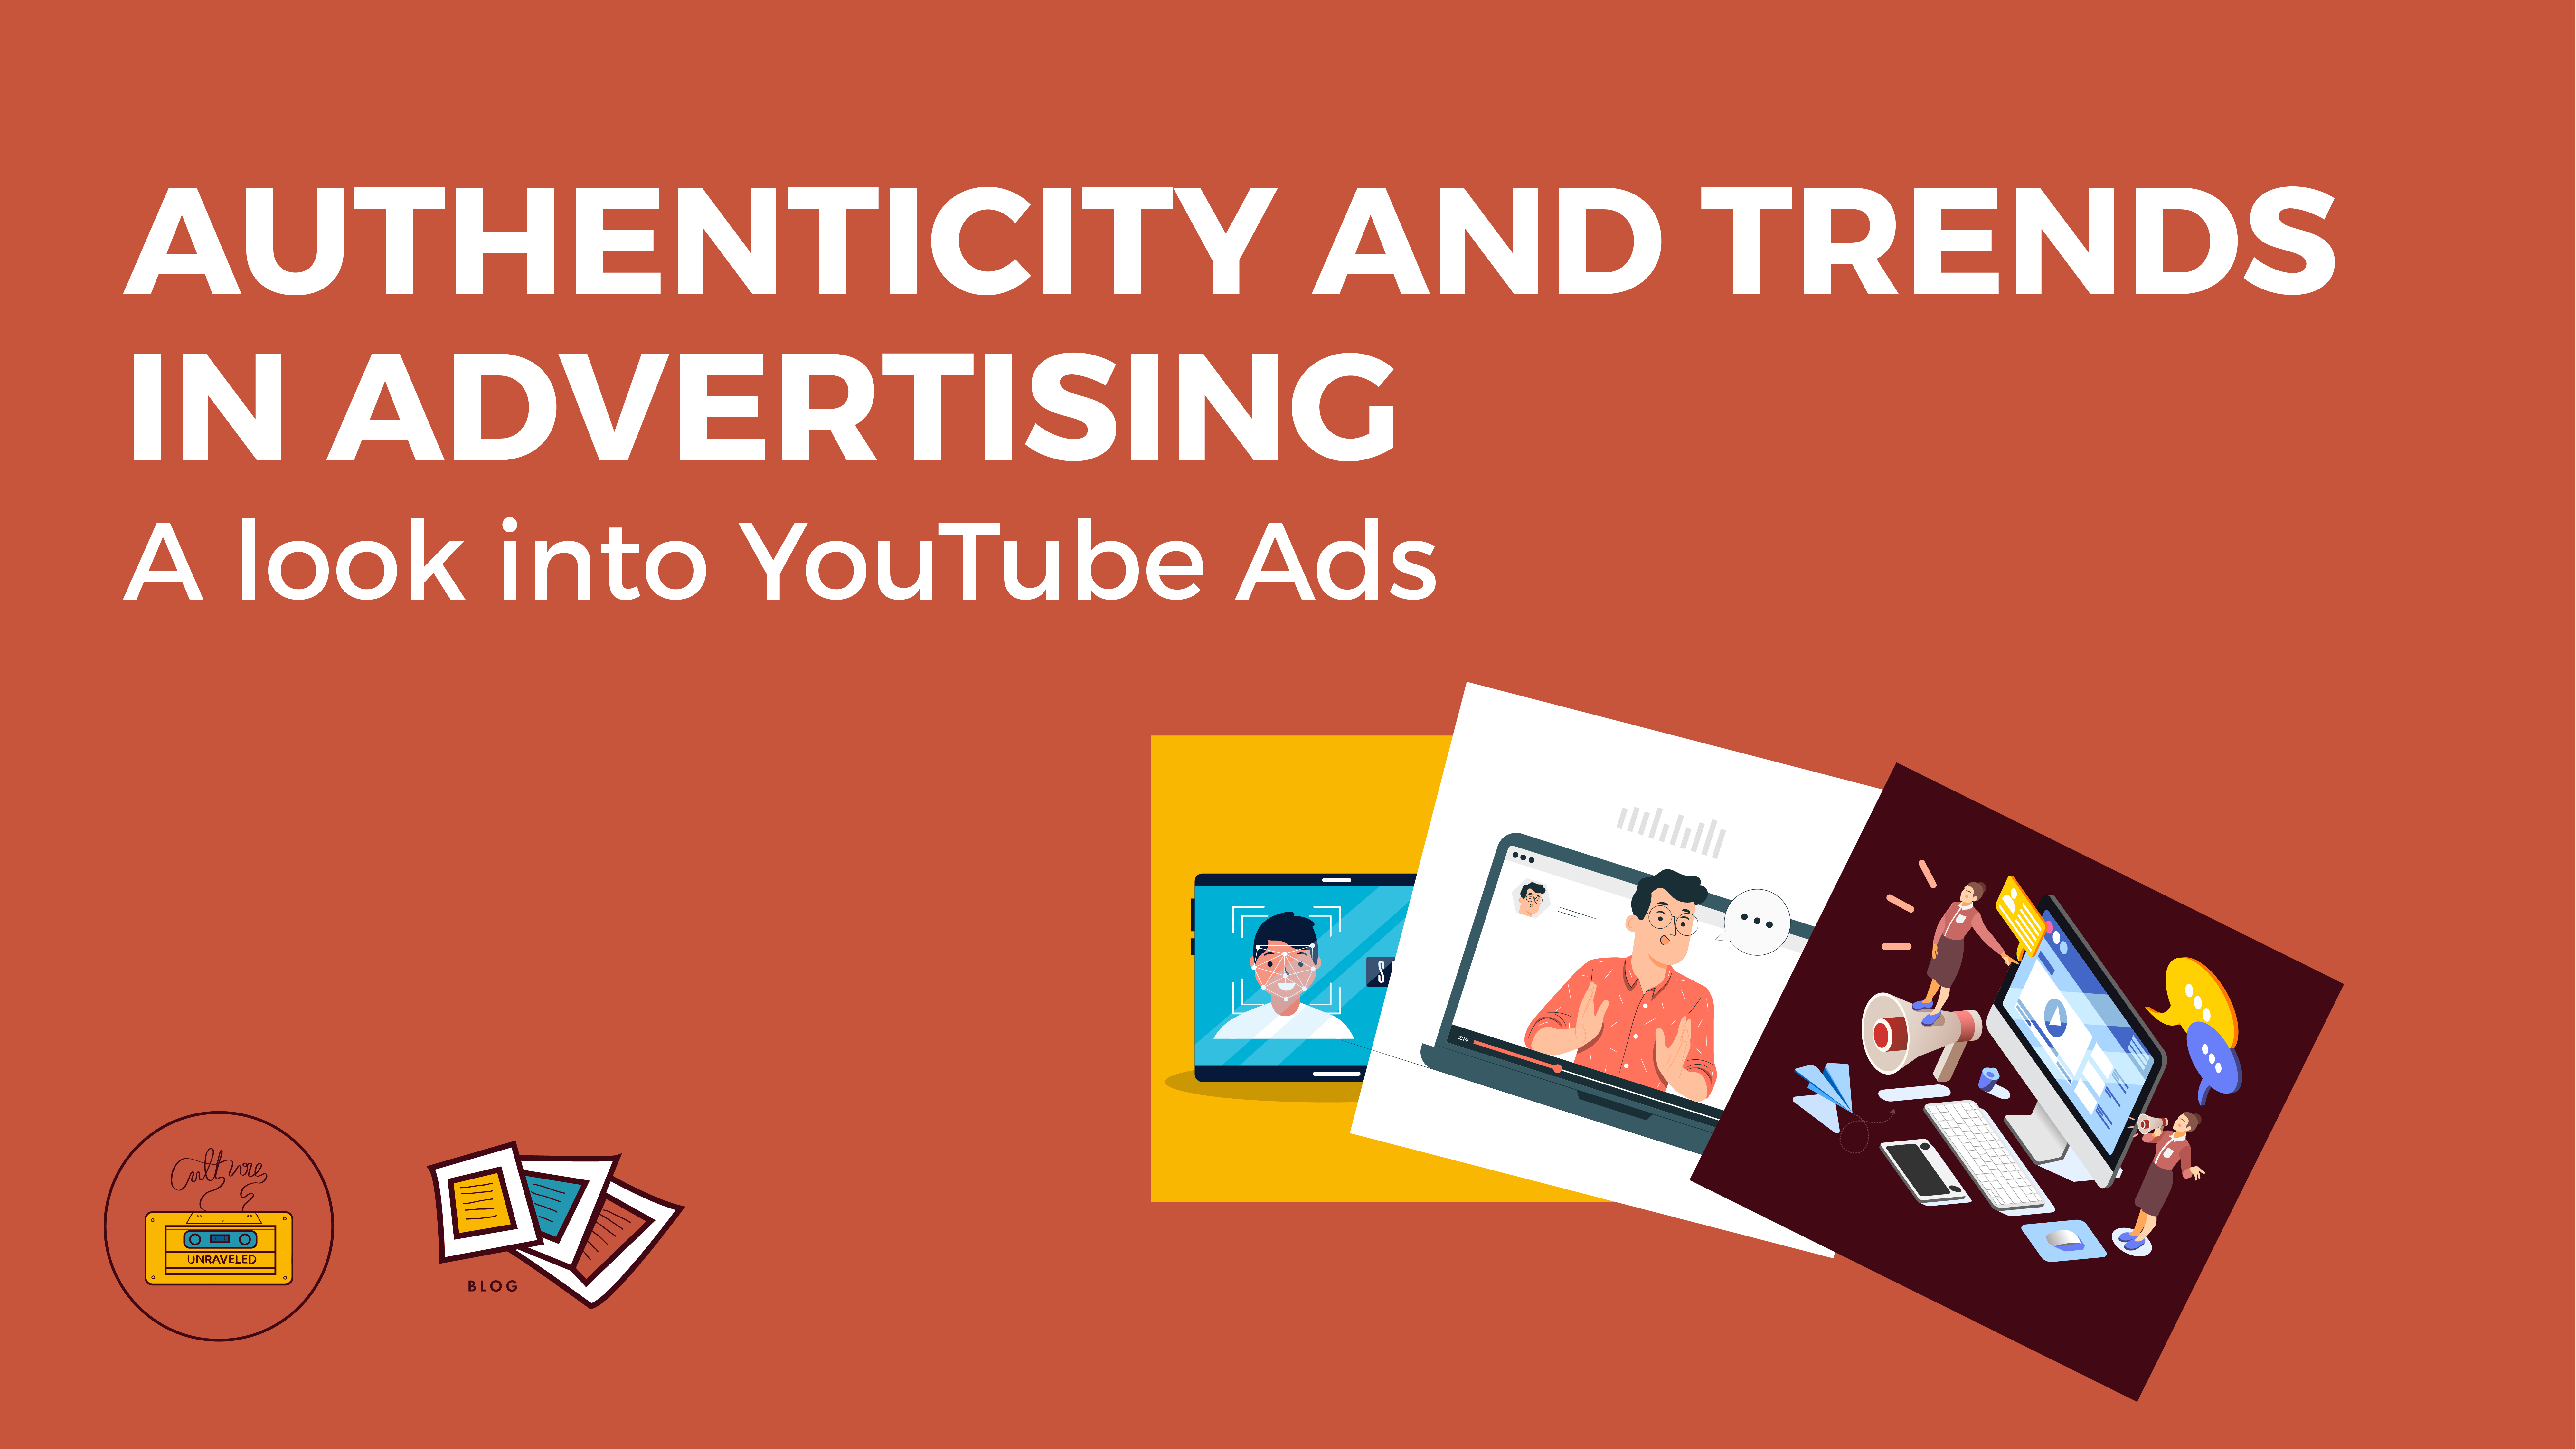 Authenticity and Trends in Advertising. A look into YouTube Ads